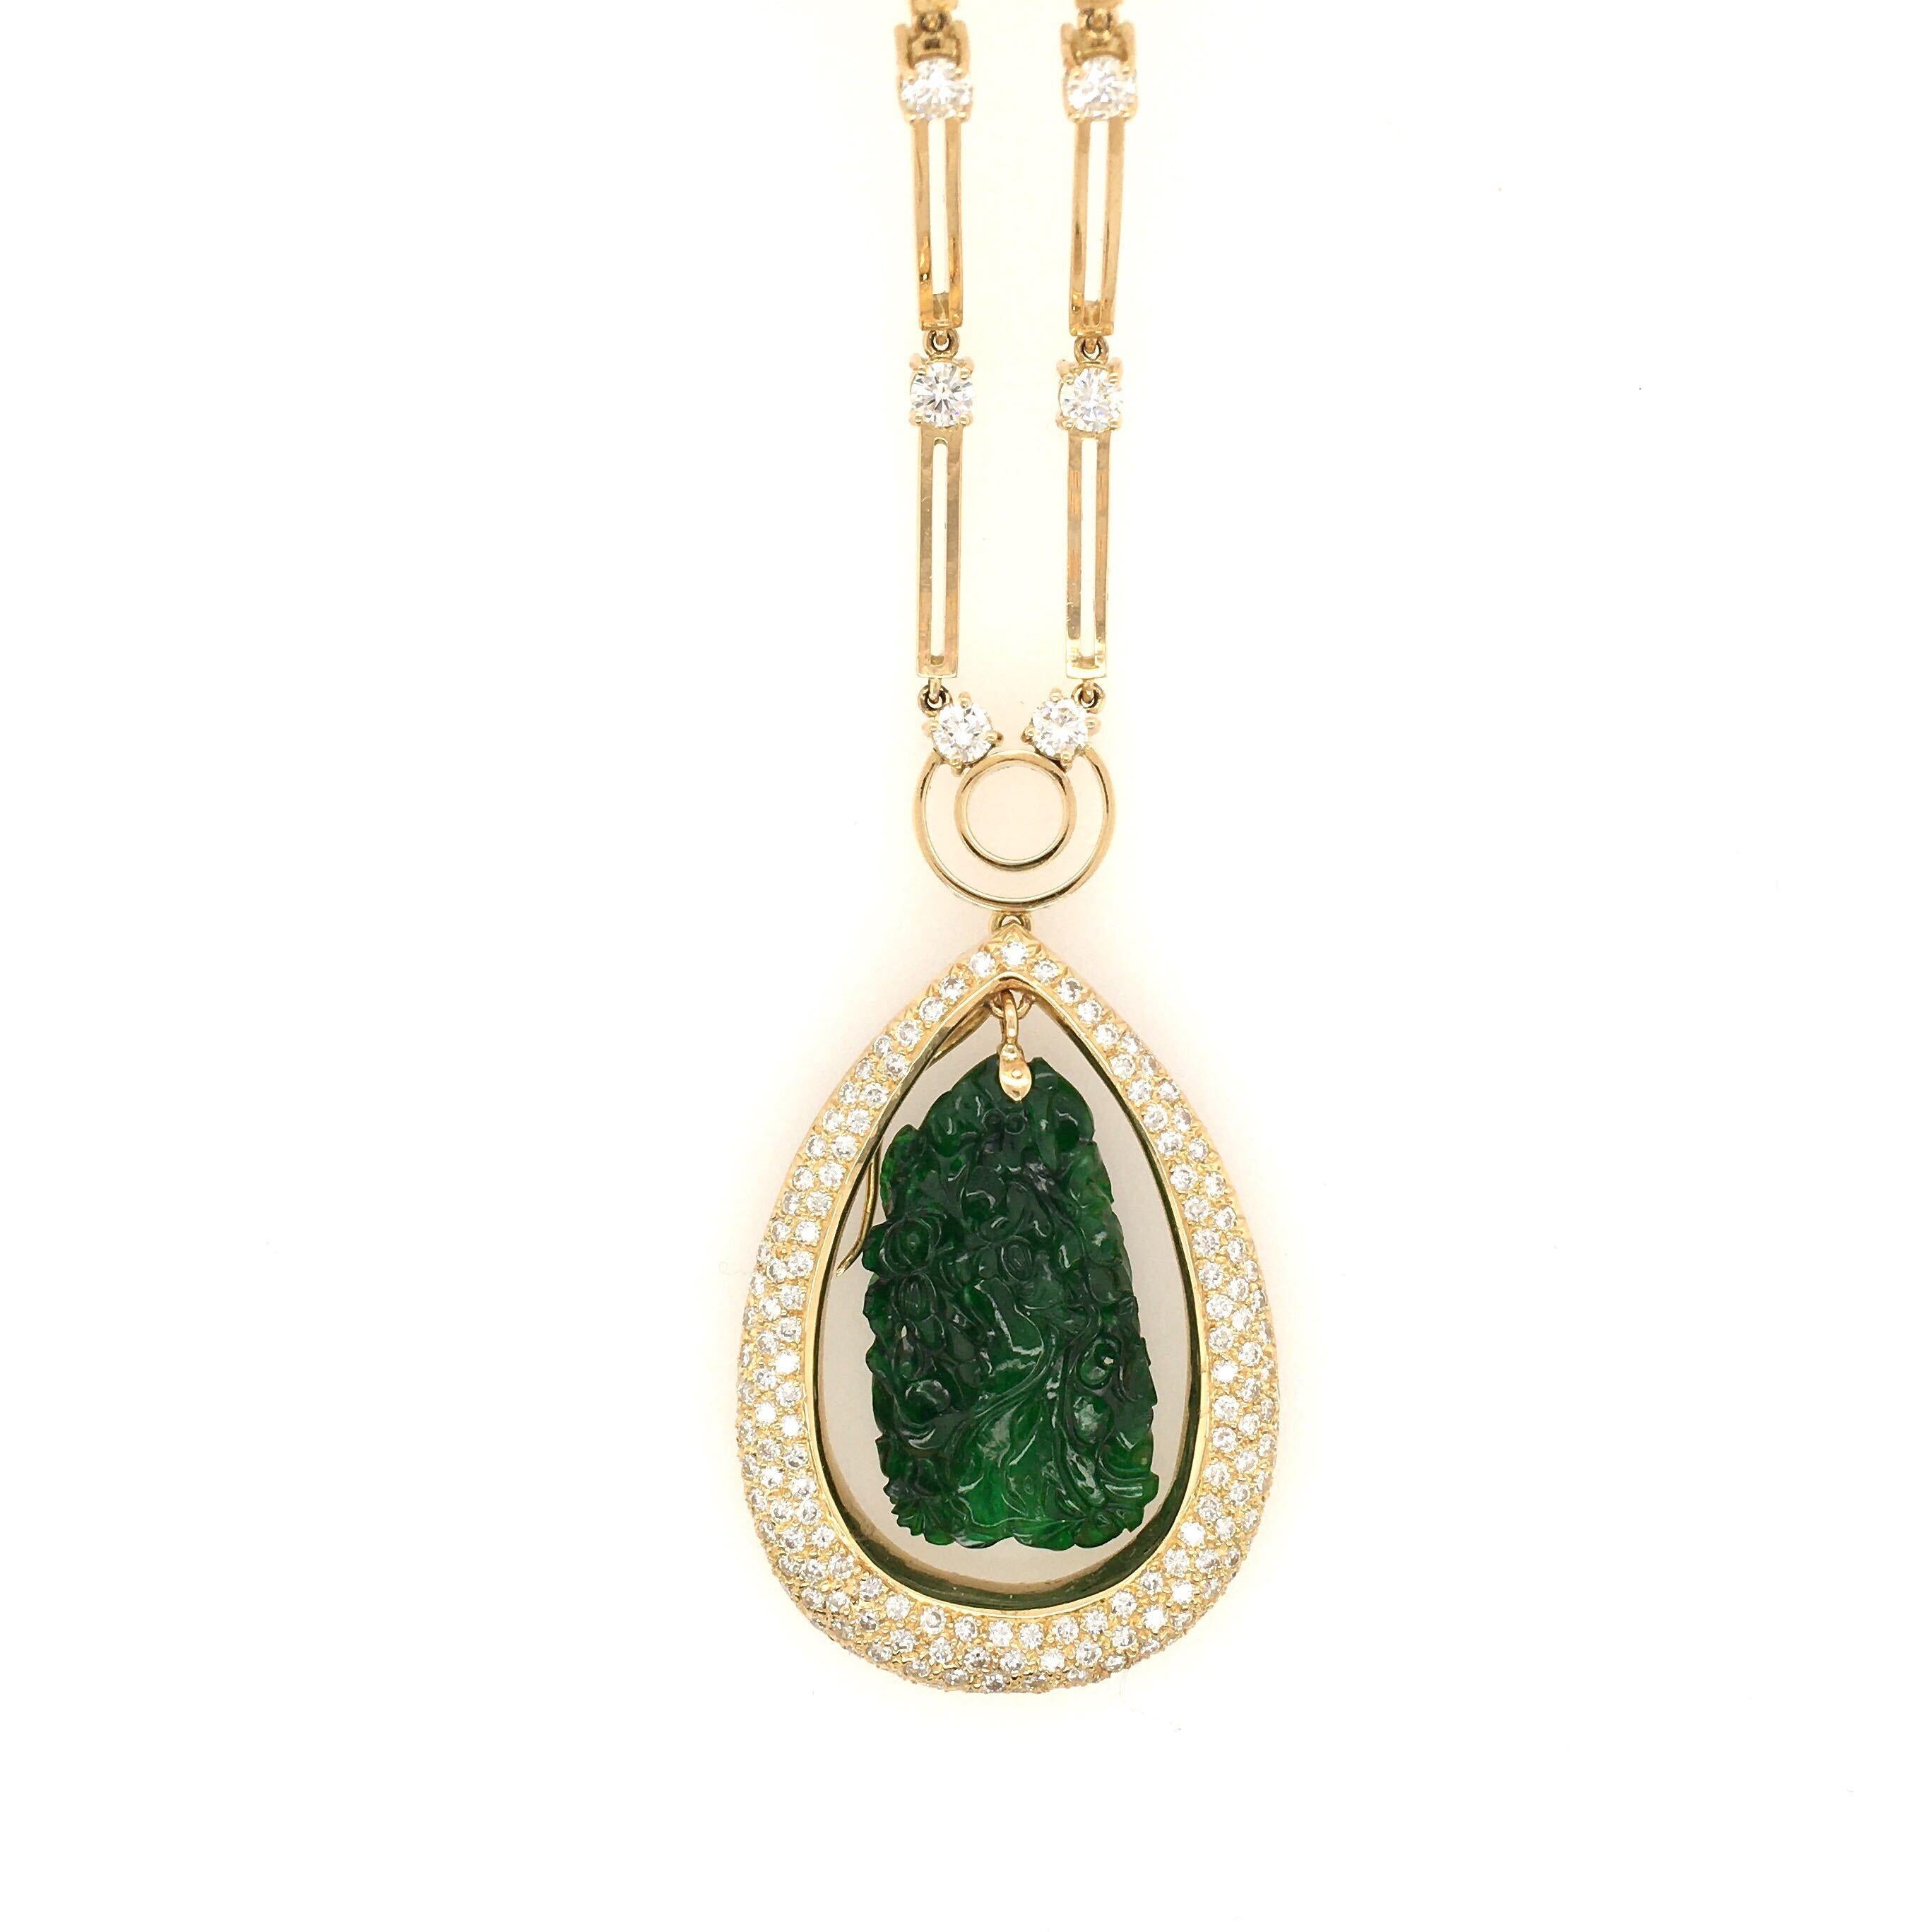 An 18 karat yellow gold, jade and diamond necklace. Suspending a rectangular carved jade plaque, measuring approximately 1 1/4 x 1/2 inch, within a pave set diamond drop shaped independent surmount, from a polished gold disc bale and rectangular